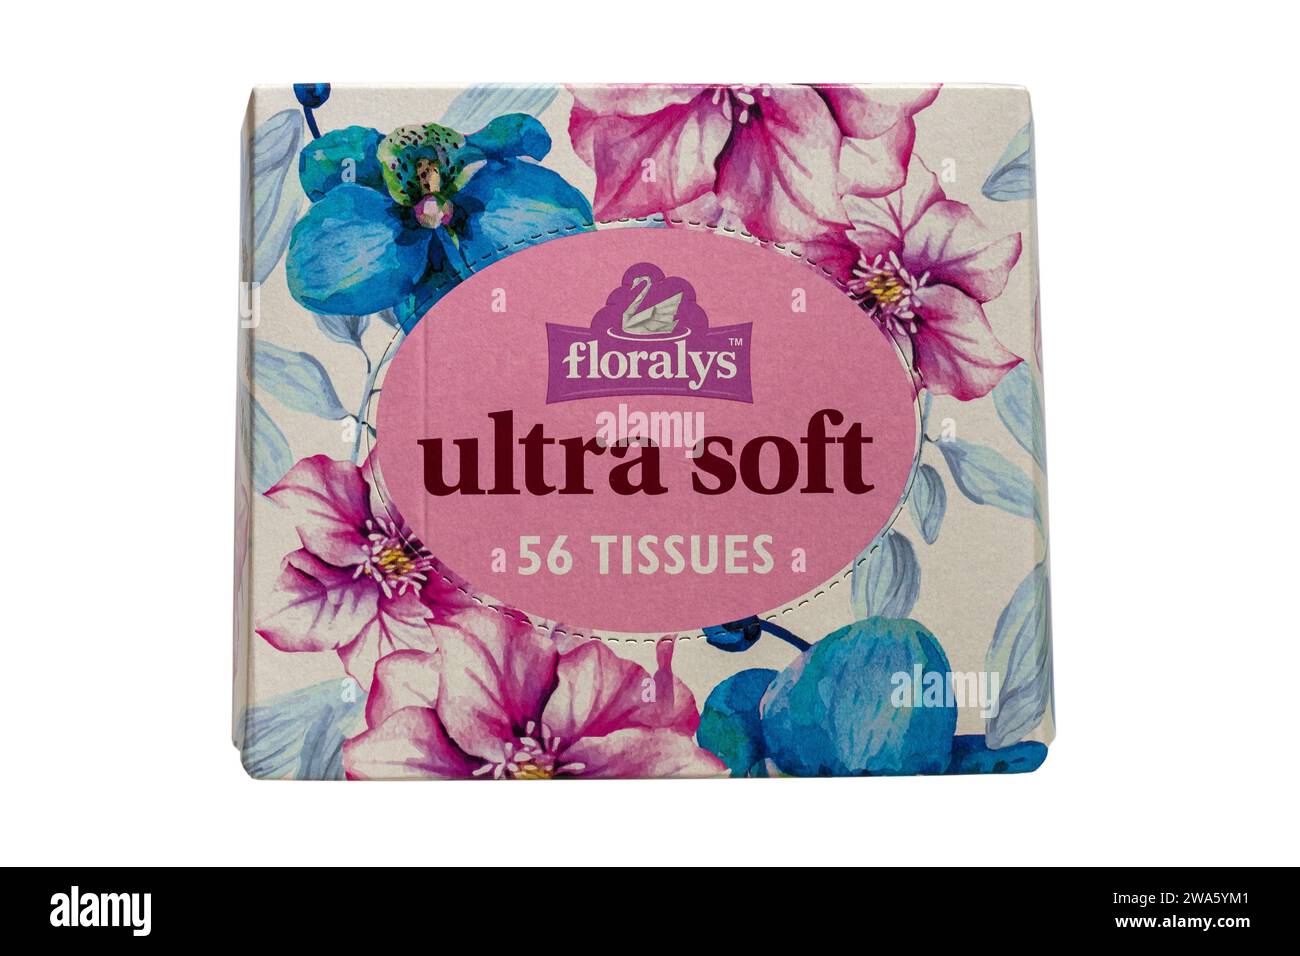 Box of floralys ultra soft tissues isolated on white background Stock Photo